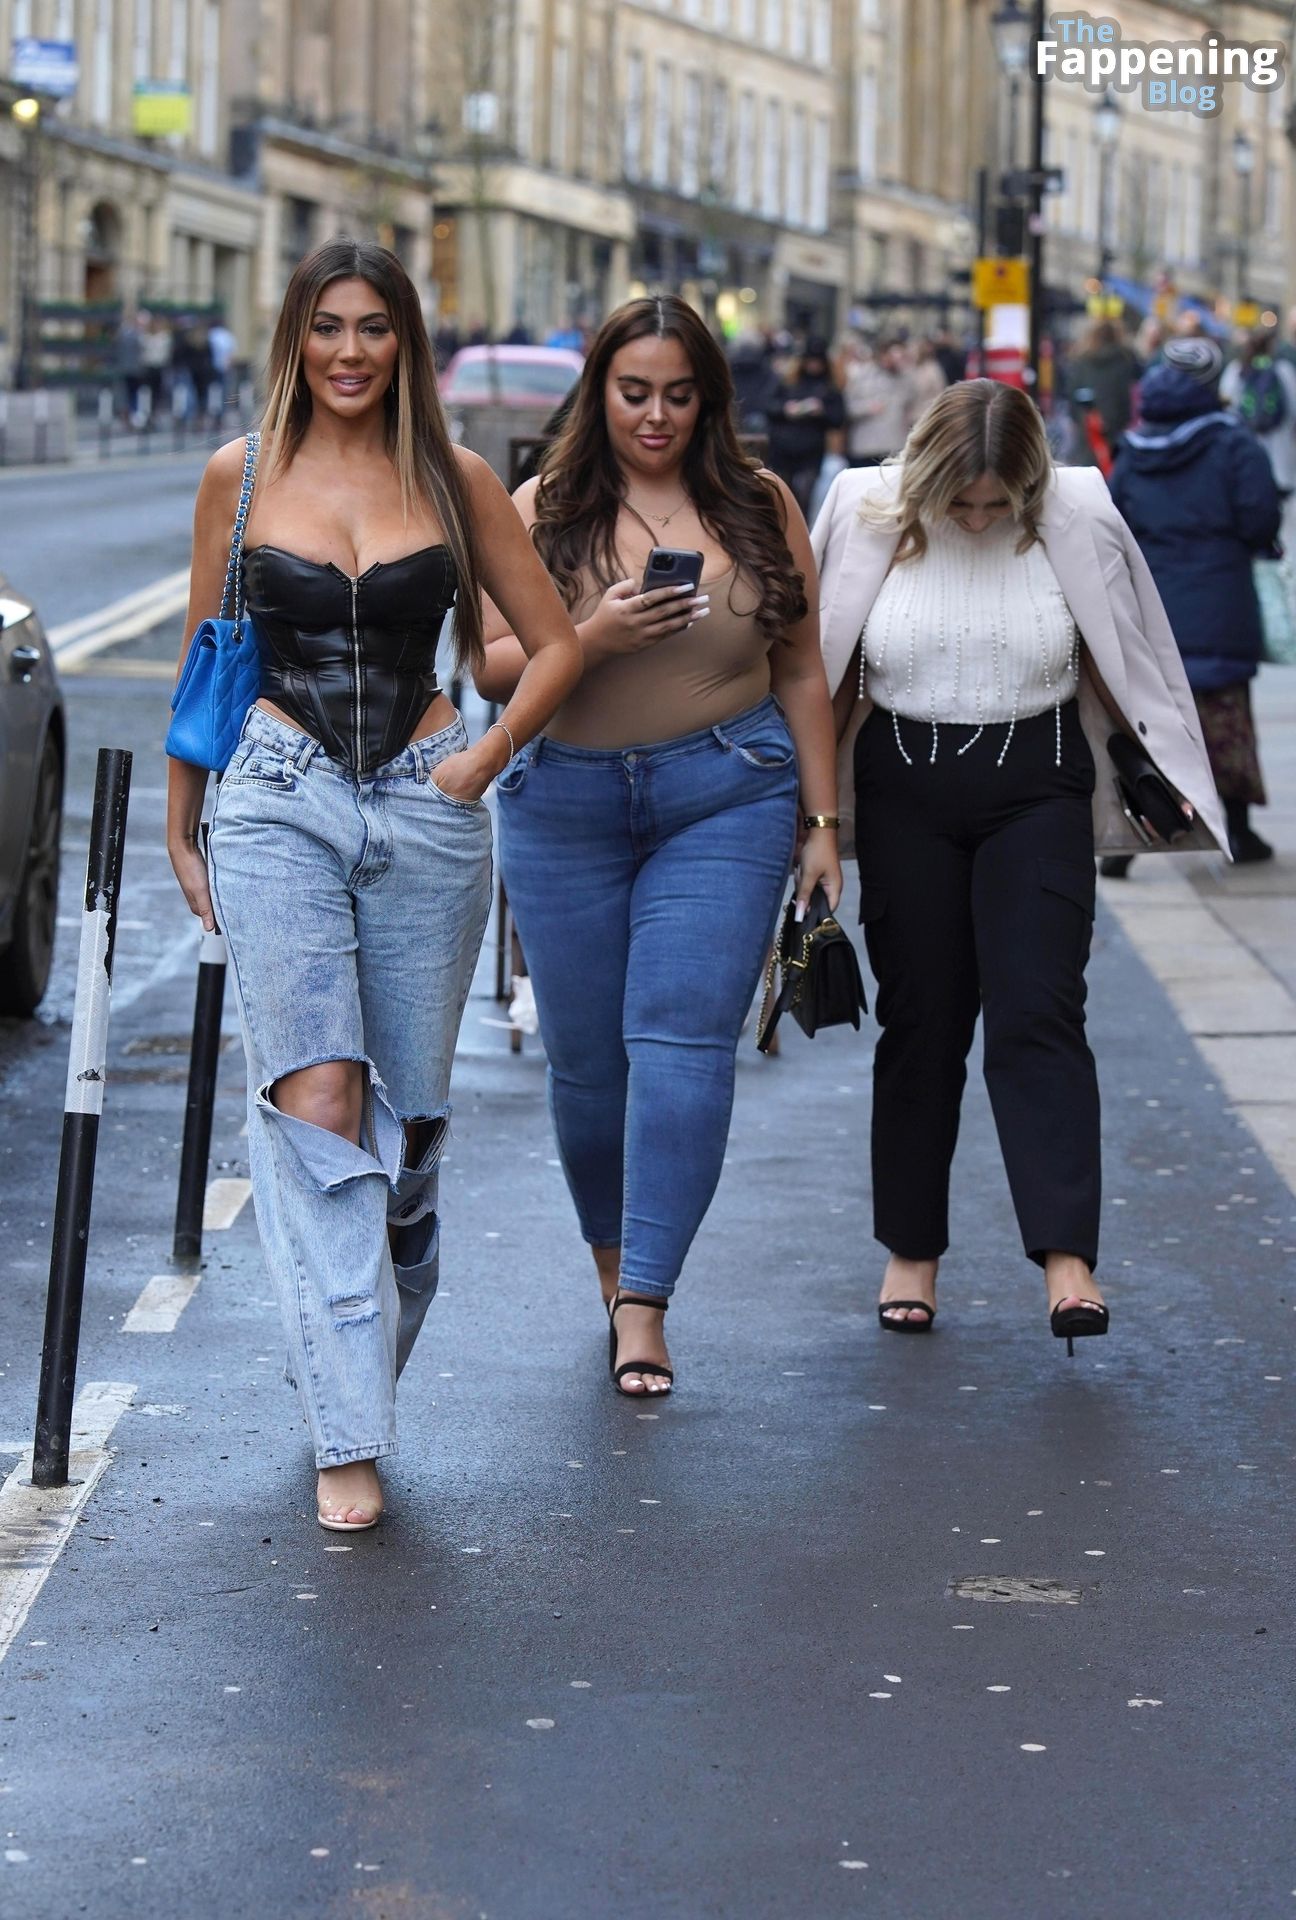 Chloe Ferry Spills Out of Leather Corset While Out for Day Drinks in Newcastle (17 Photos)